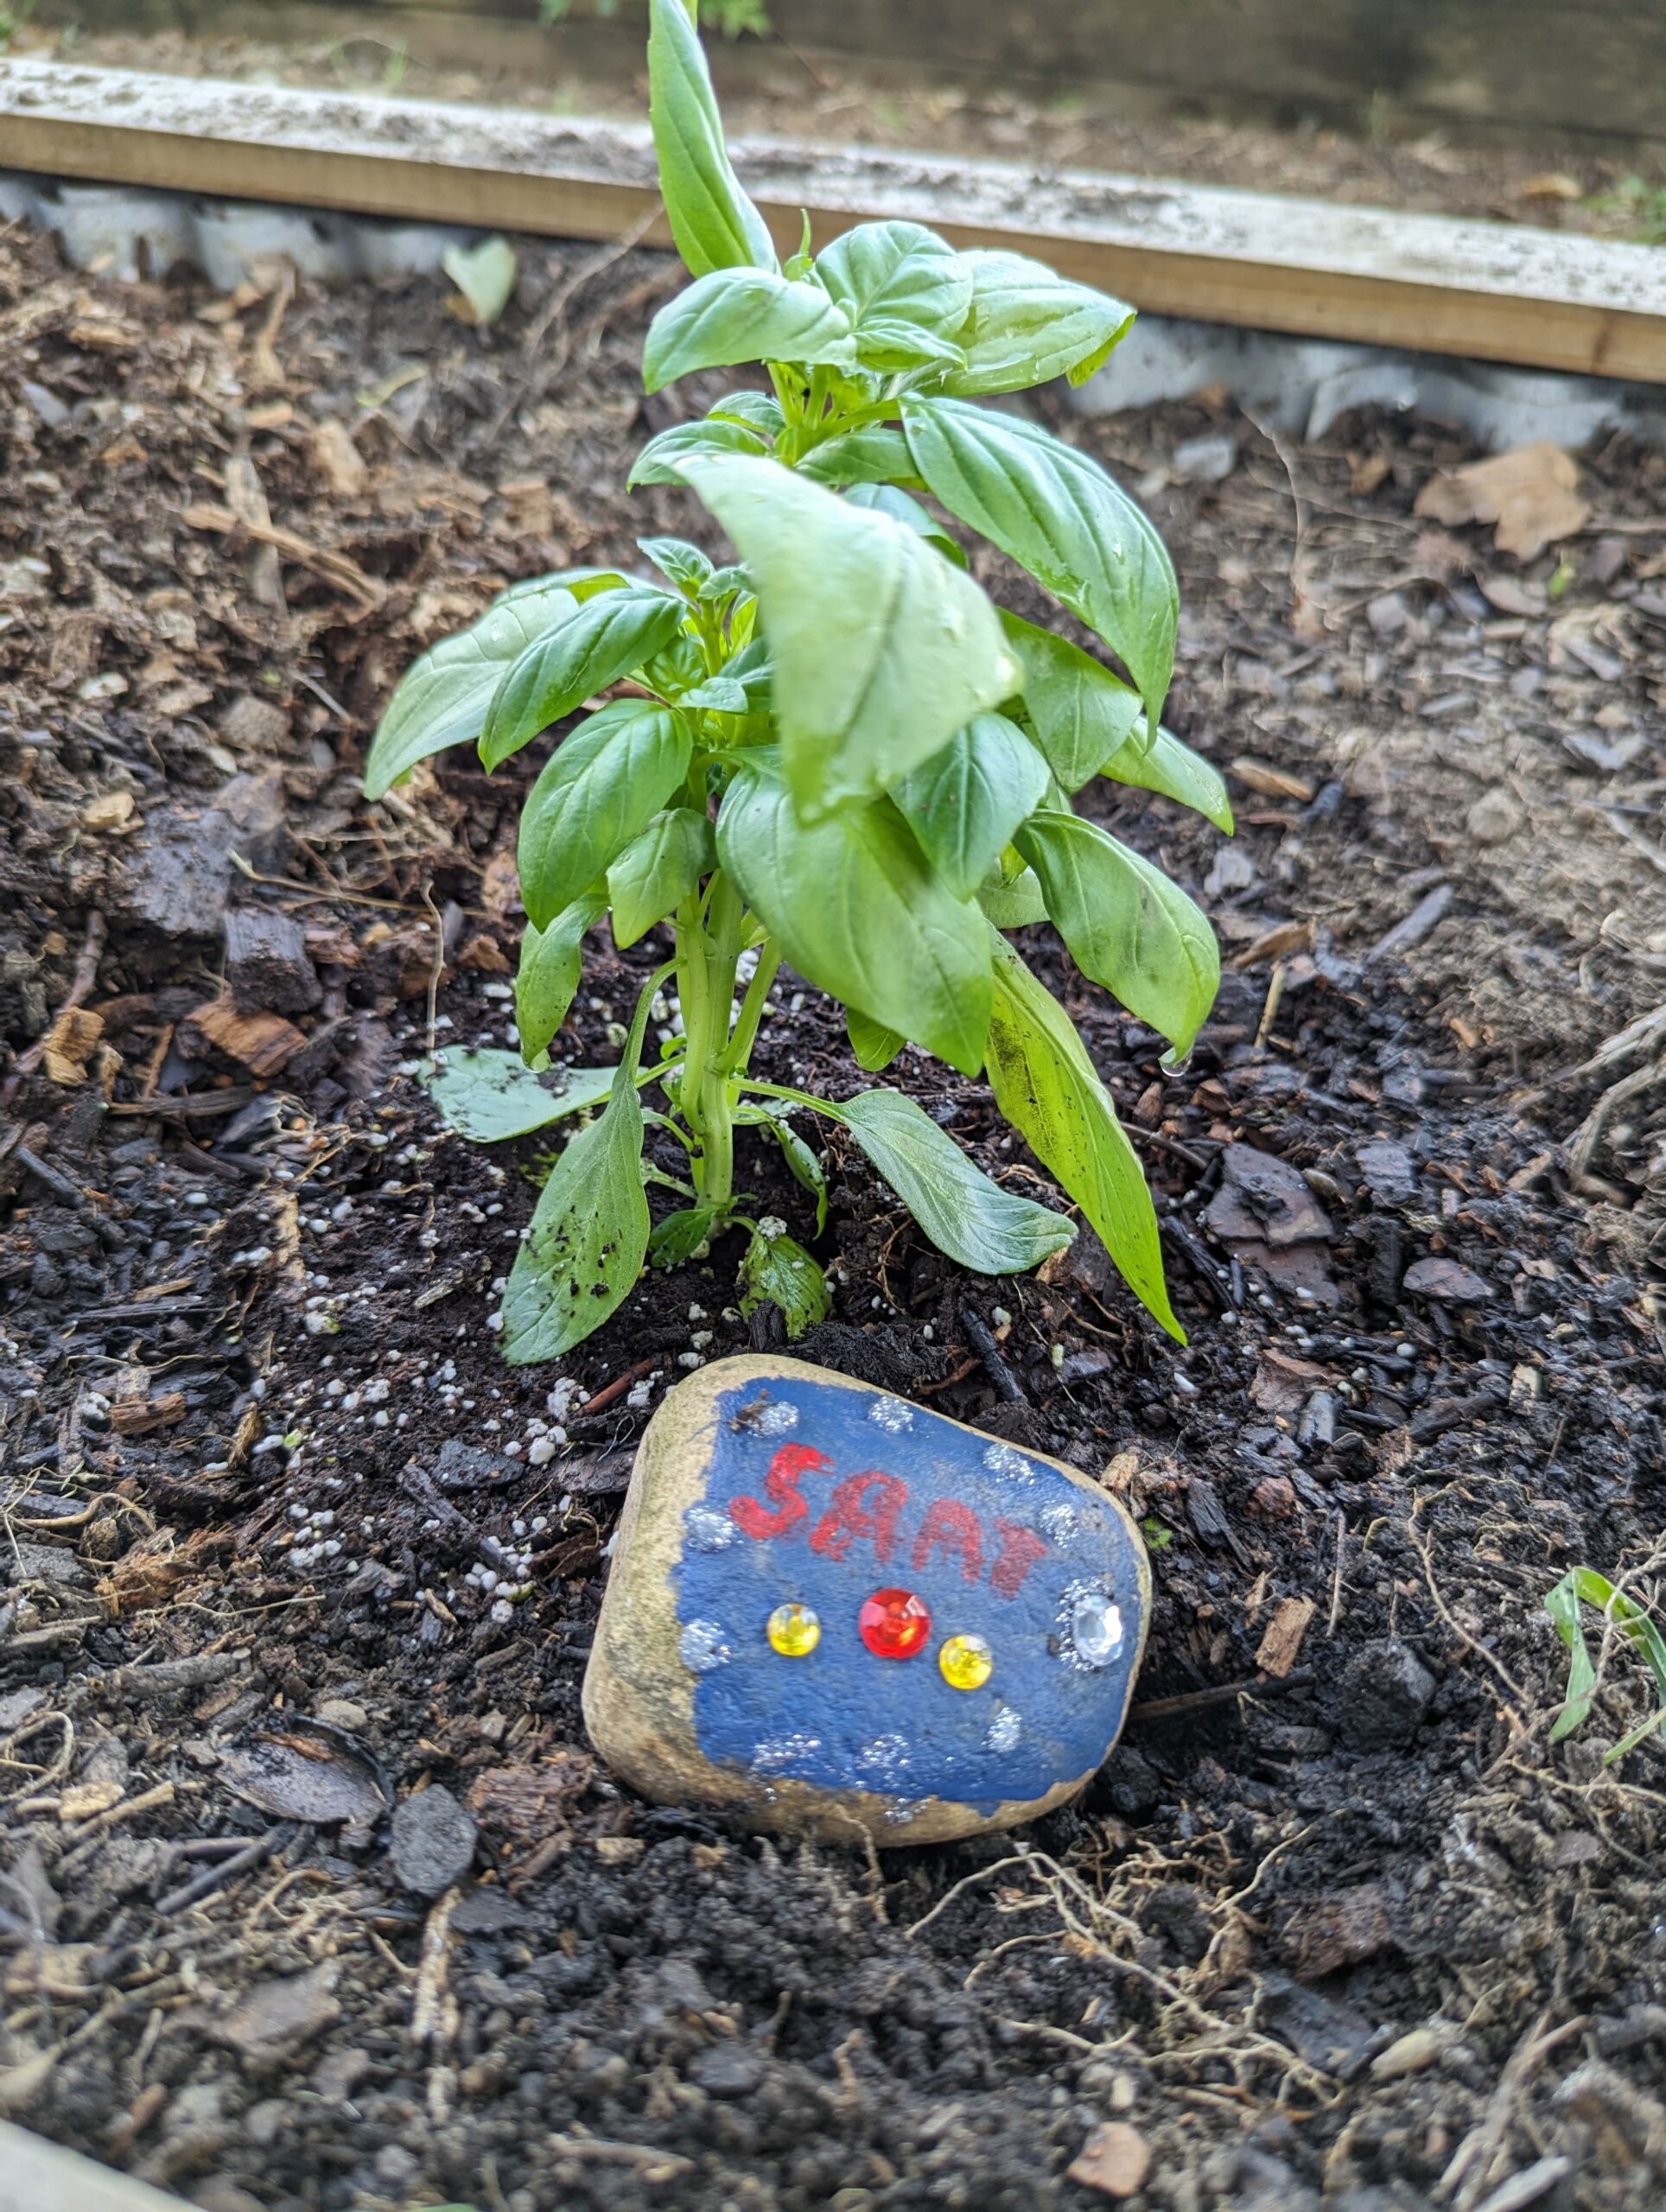 basil and a painted rock.